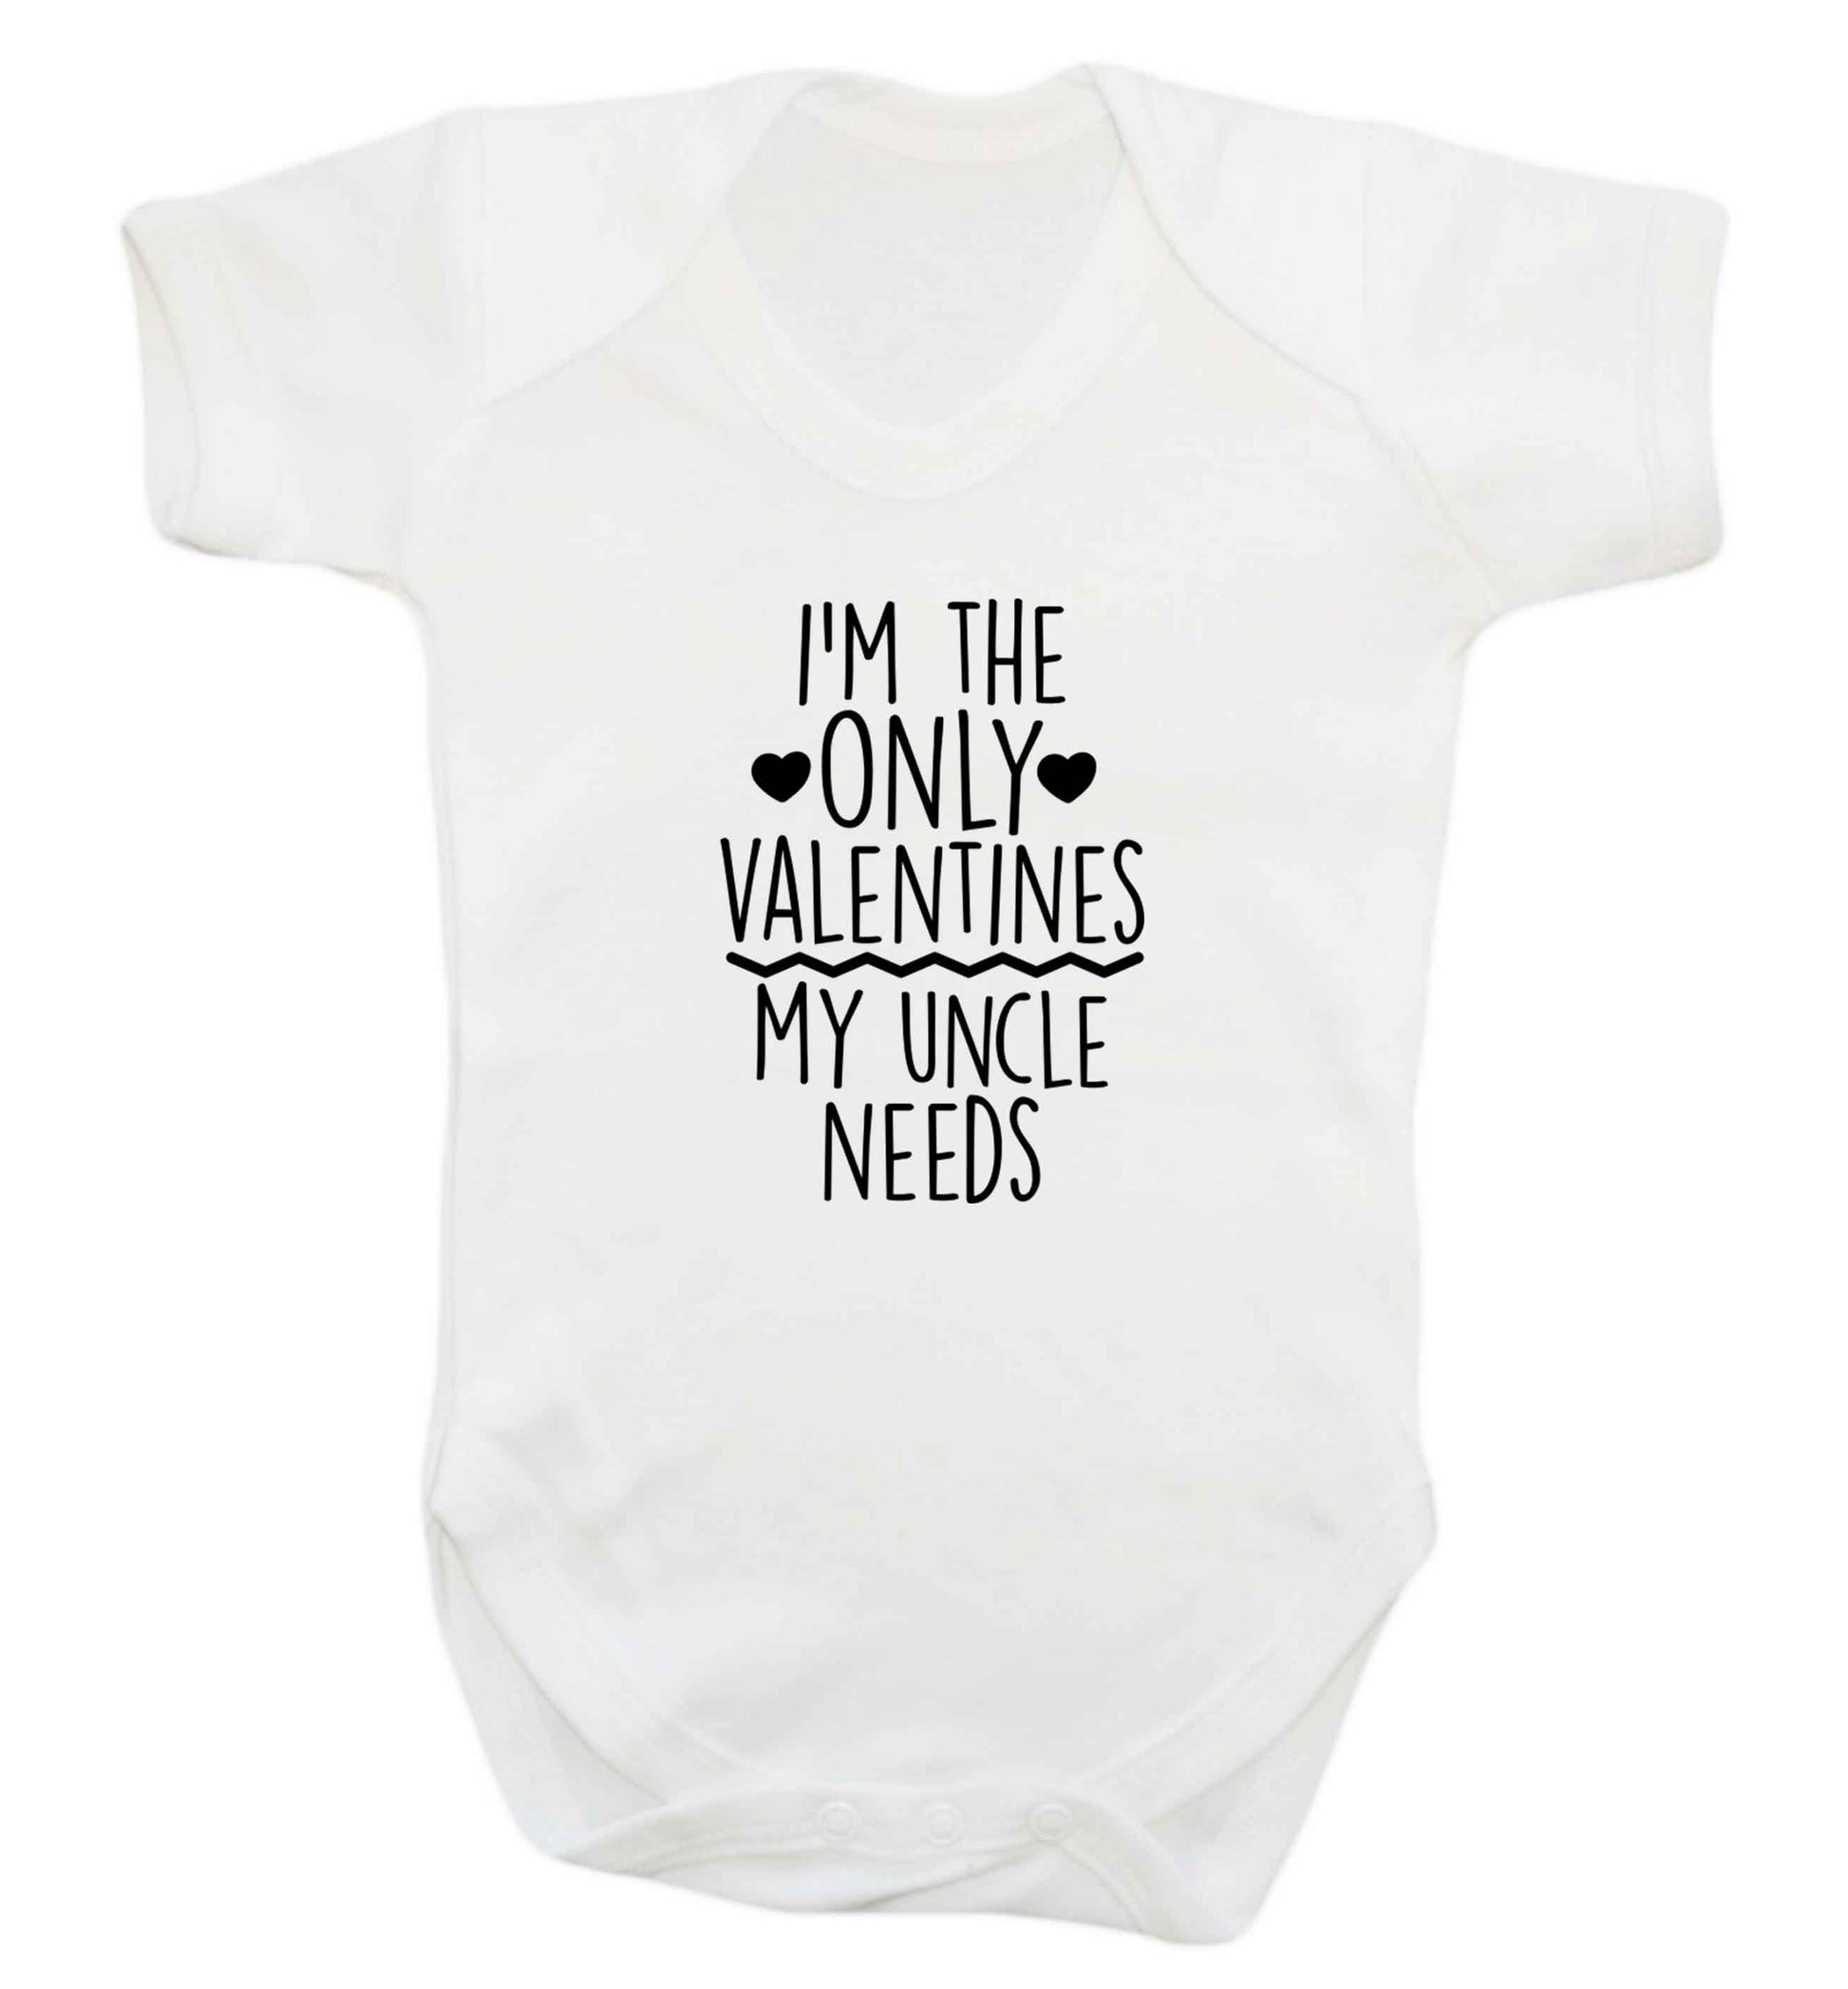 I'm the only valentines my uncle needs baby vest white 18-24 months